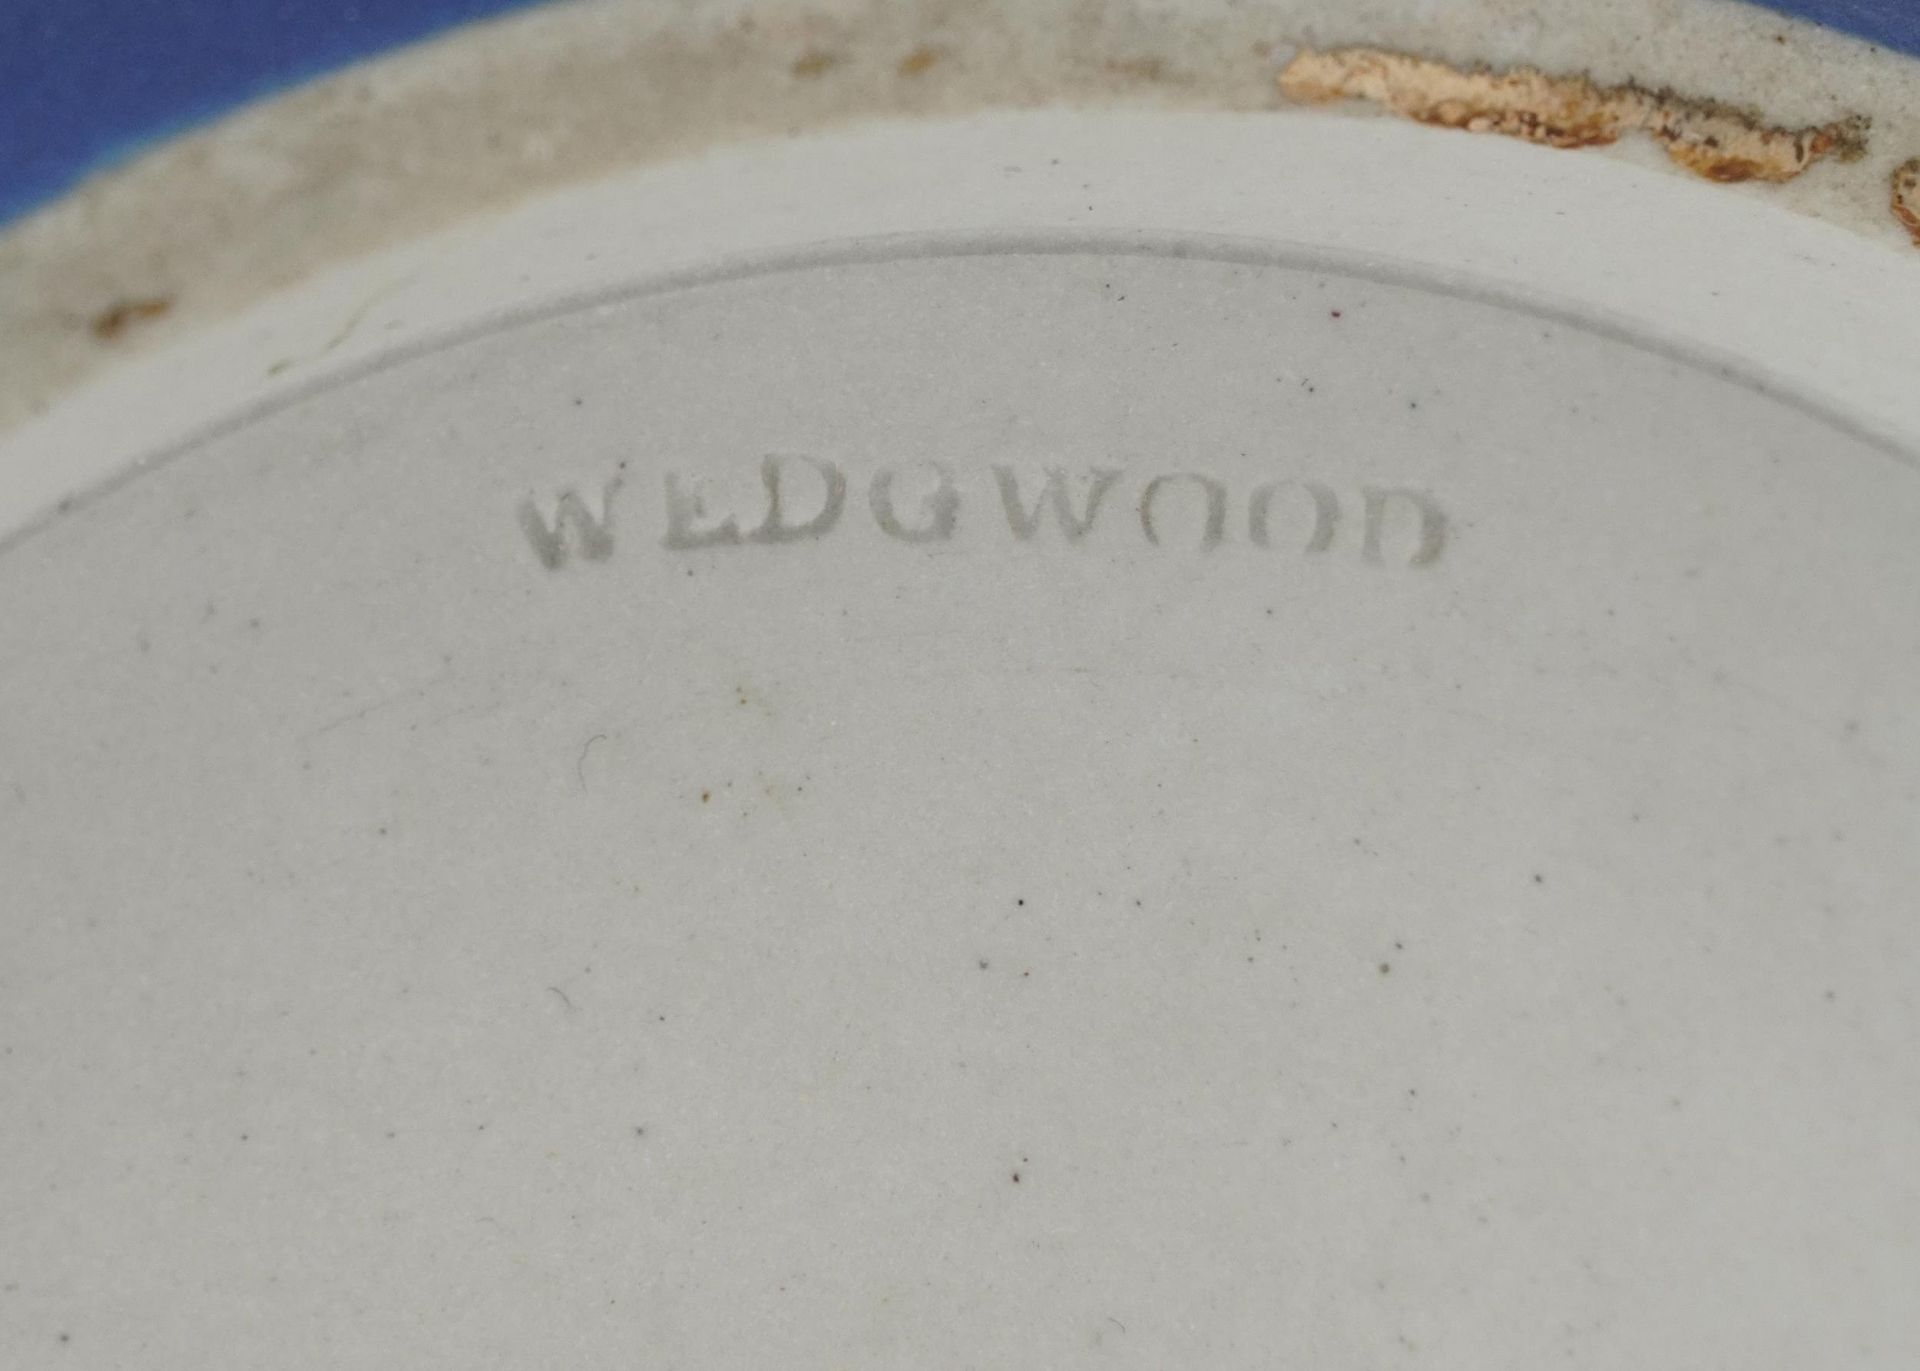 Wedgwood Jasperware biscuit barrel and cover with silver plated mounts, 16cm high including the - Image 5 of 5